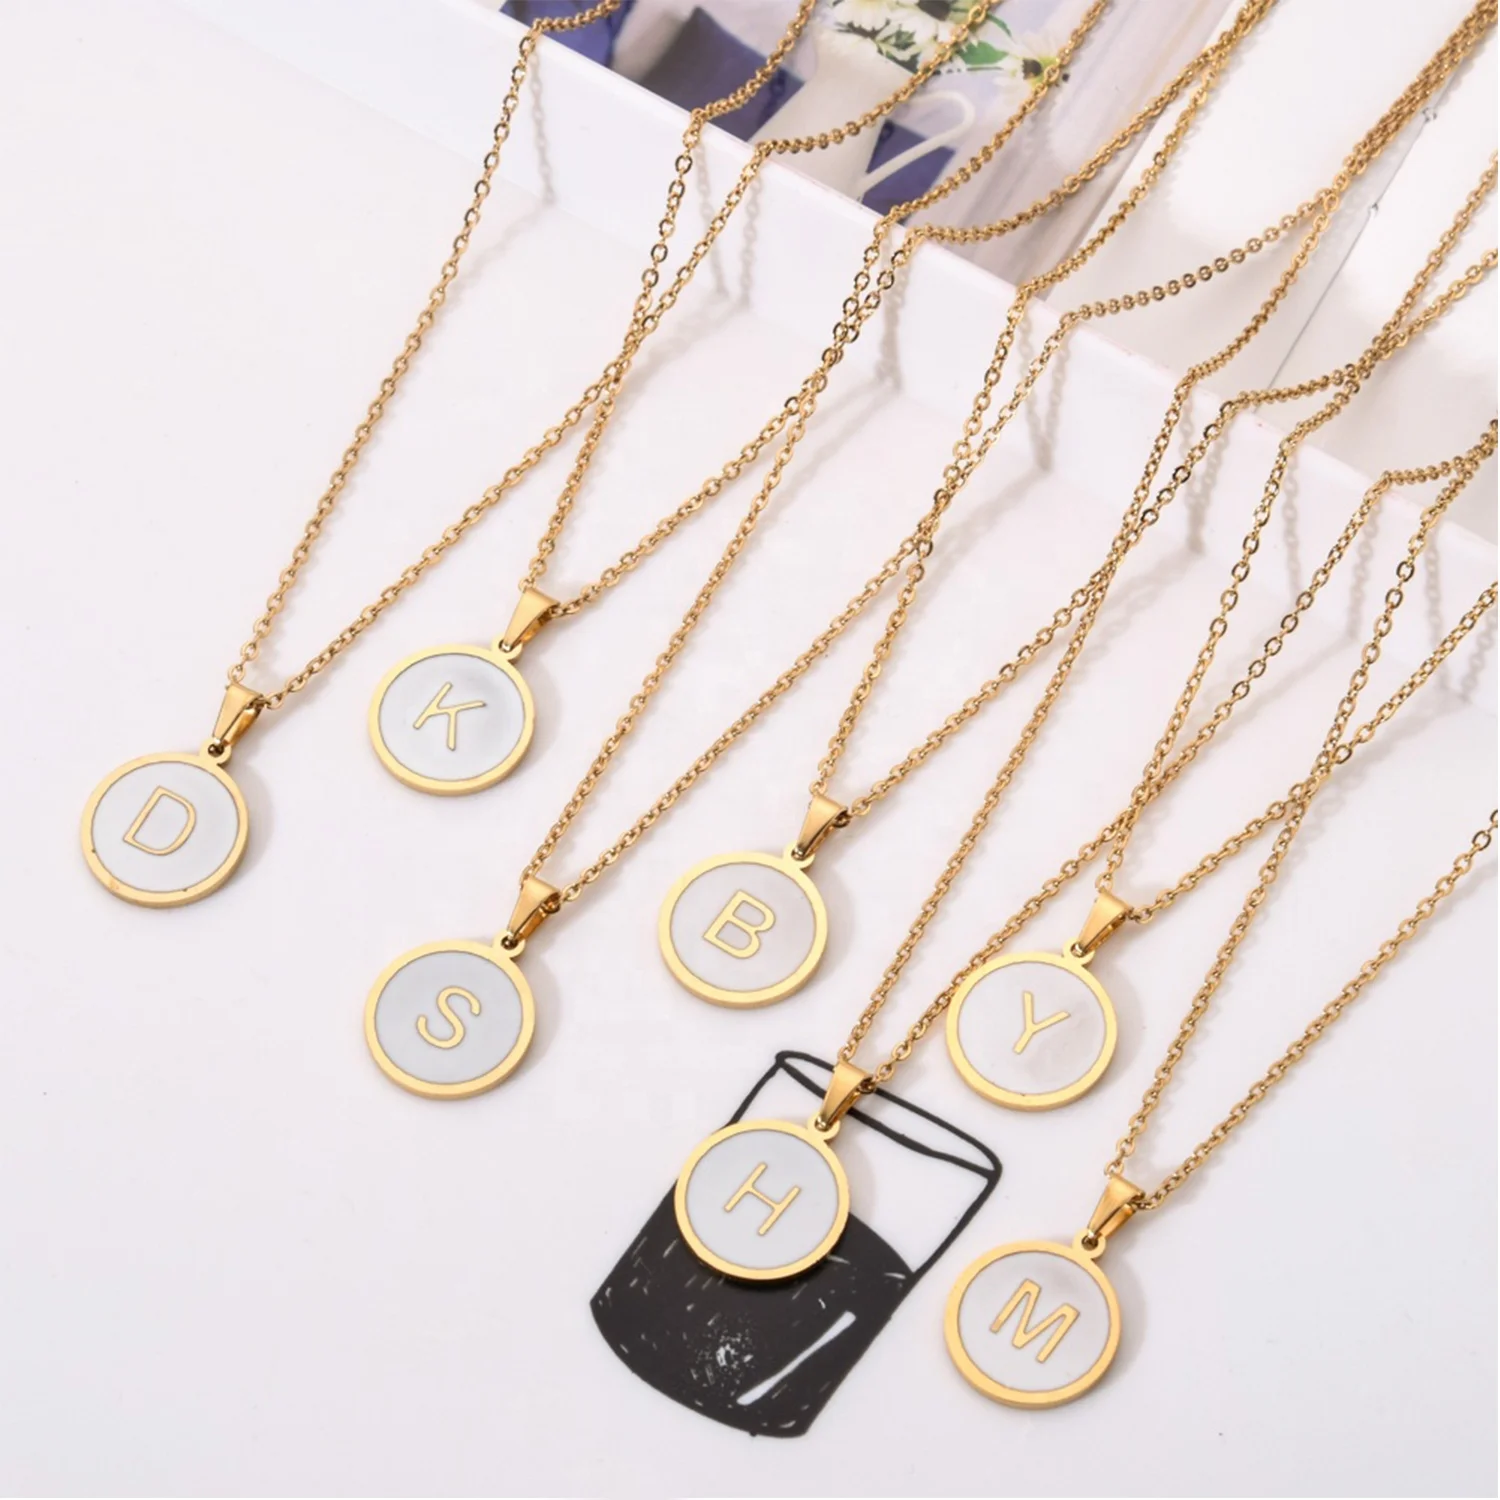 

Gold Color 26 Letter Necklace Initial Alphabet Shell Pendant Necklace Fashion Titanium Steel Chain Necklace Women Jewelry Gifts, White